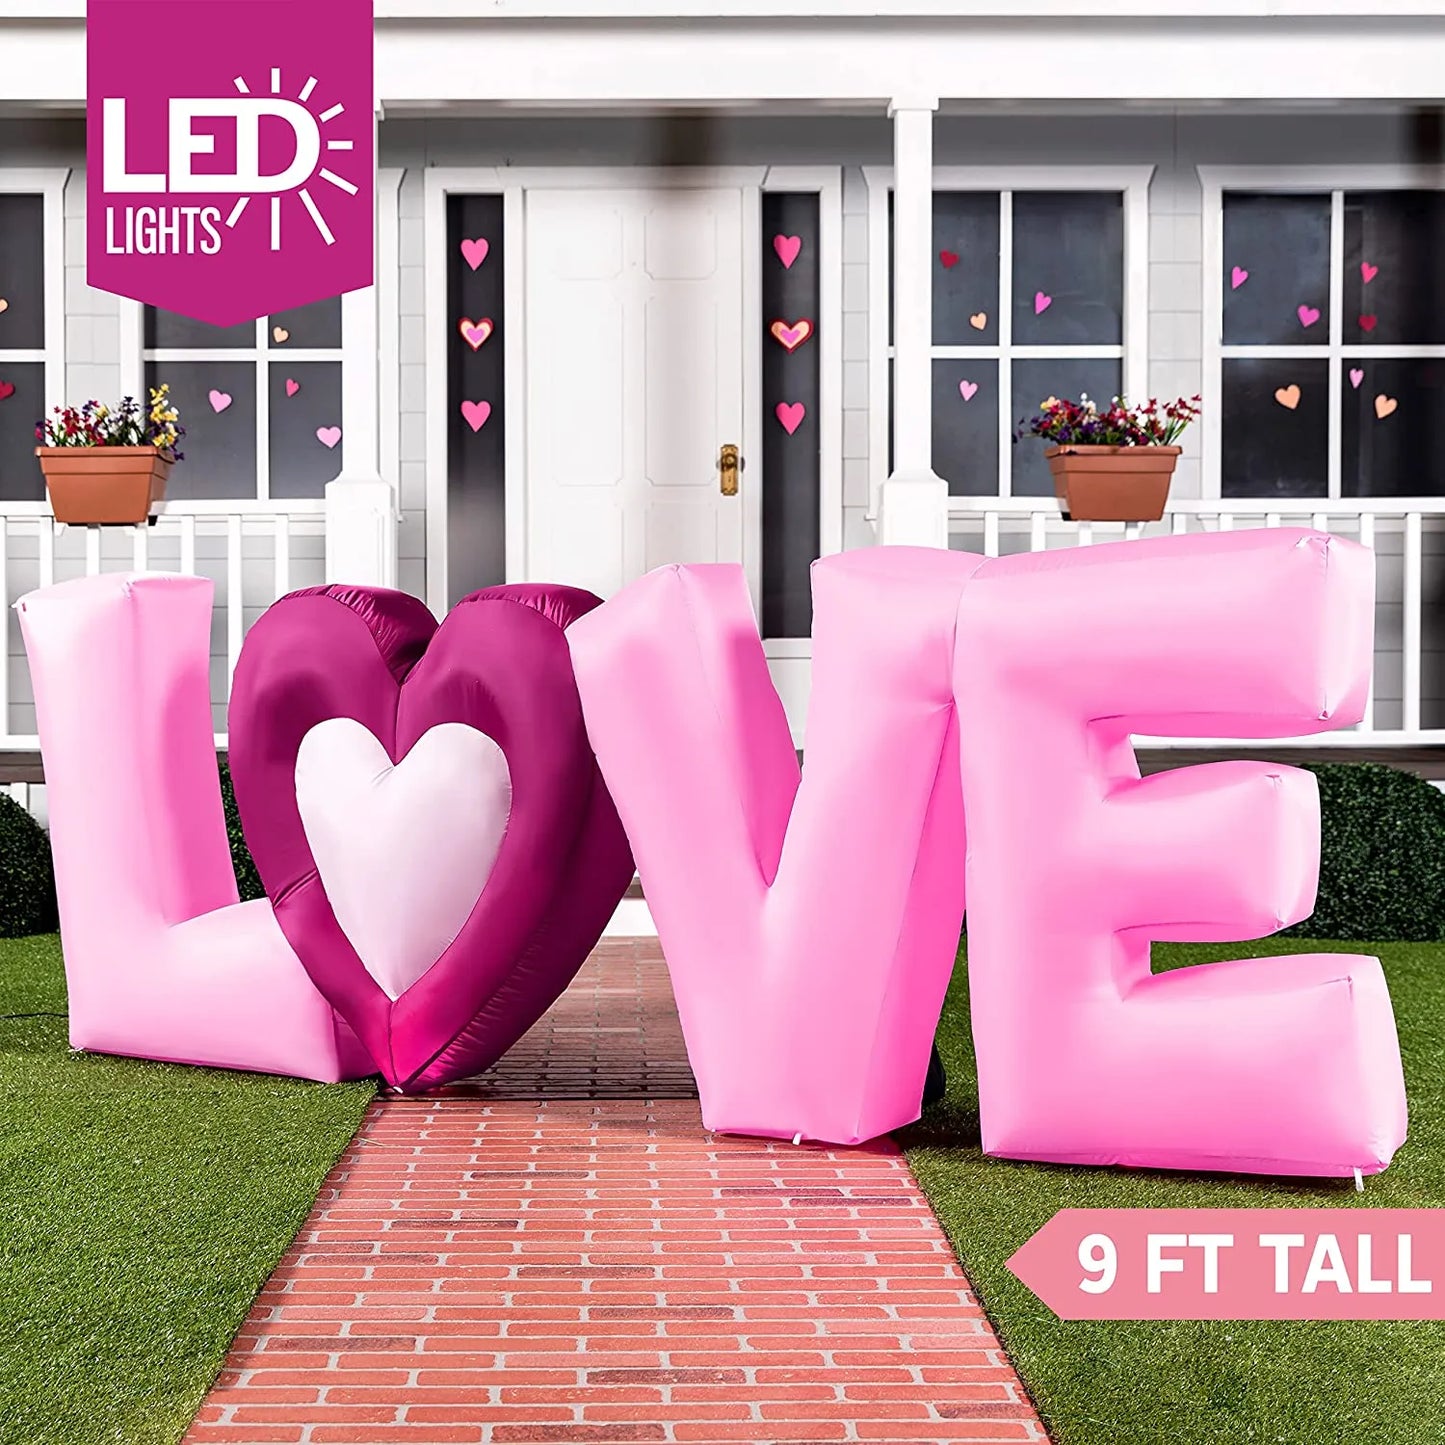 9 FT Inflatable Love Letters with LED Lights